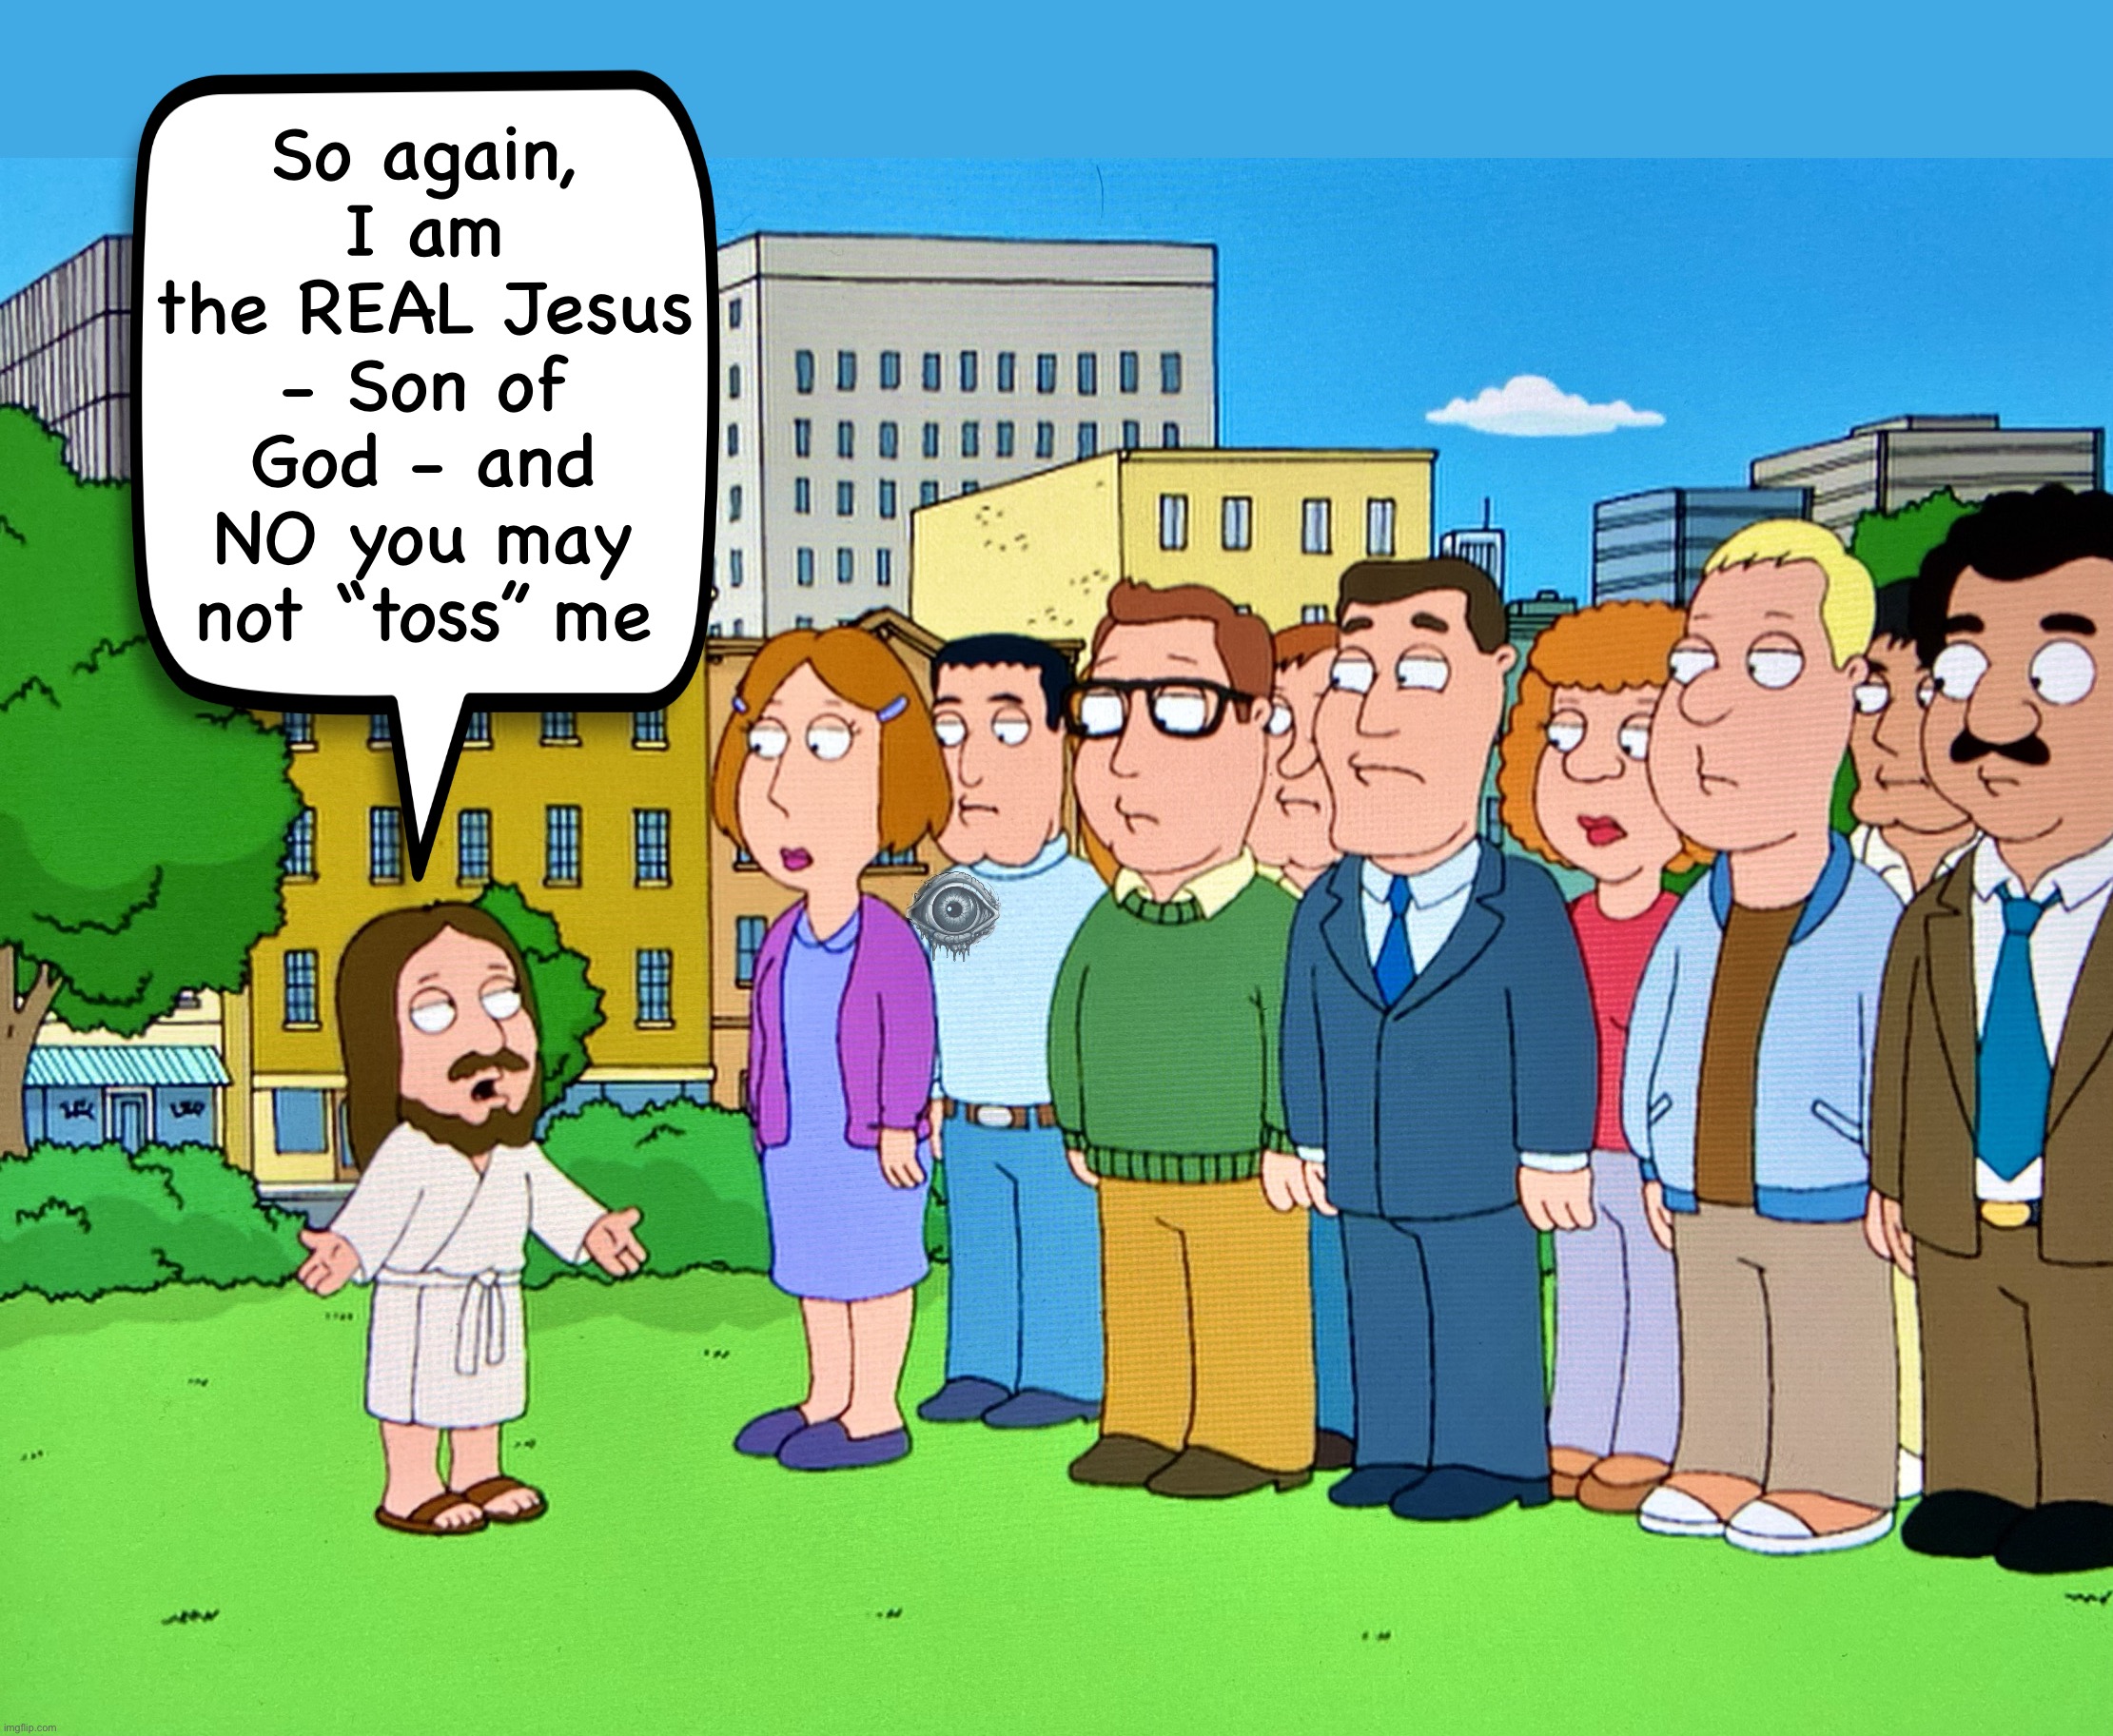 He has, uh, risen? | So again, I am the REAL Jesus - Son of God - and NO you may not “toss” me | image tagged in jesus,crowd of people,memes,family guy,dwarves,midget | made w/ Imgflip meme maker